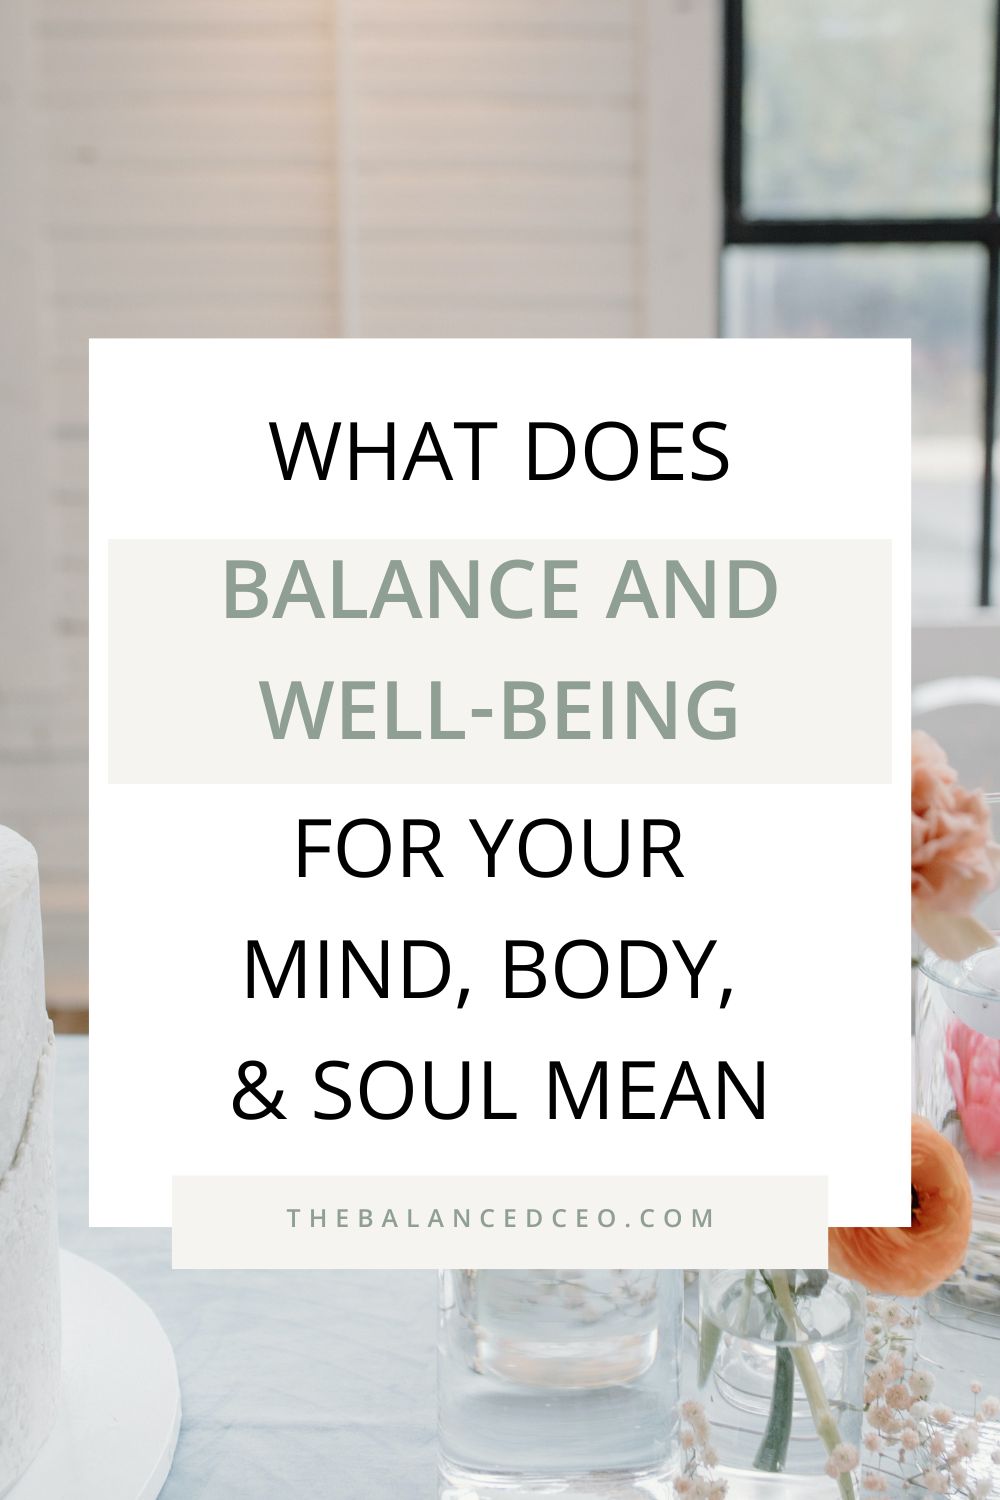 What Do Balance and Well-Being for Your Mind, Body, and Soul Mean